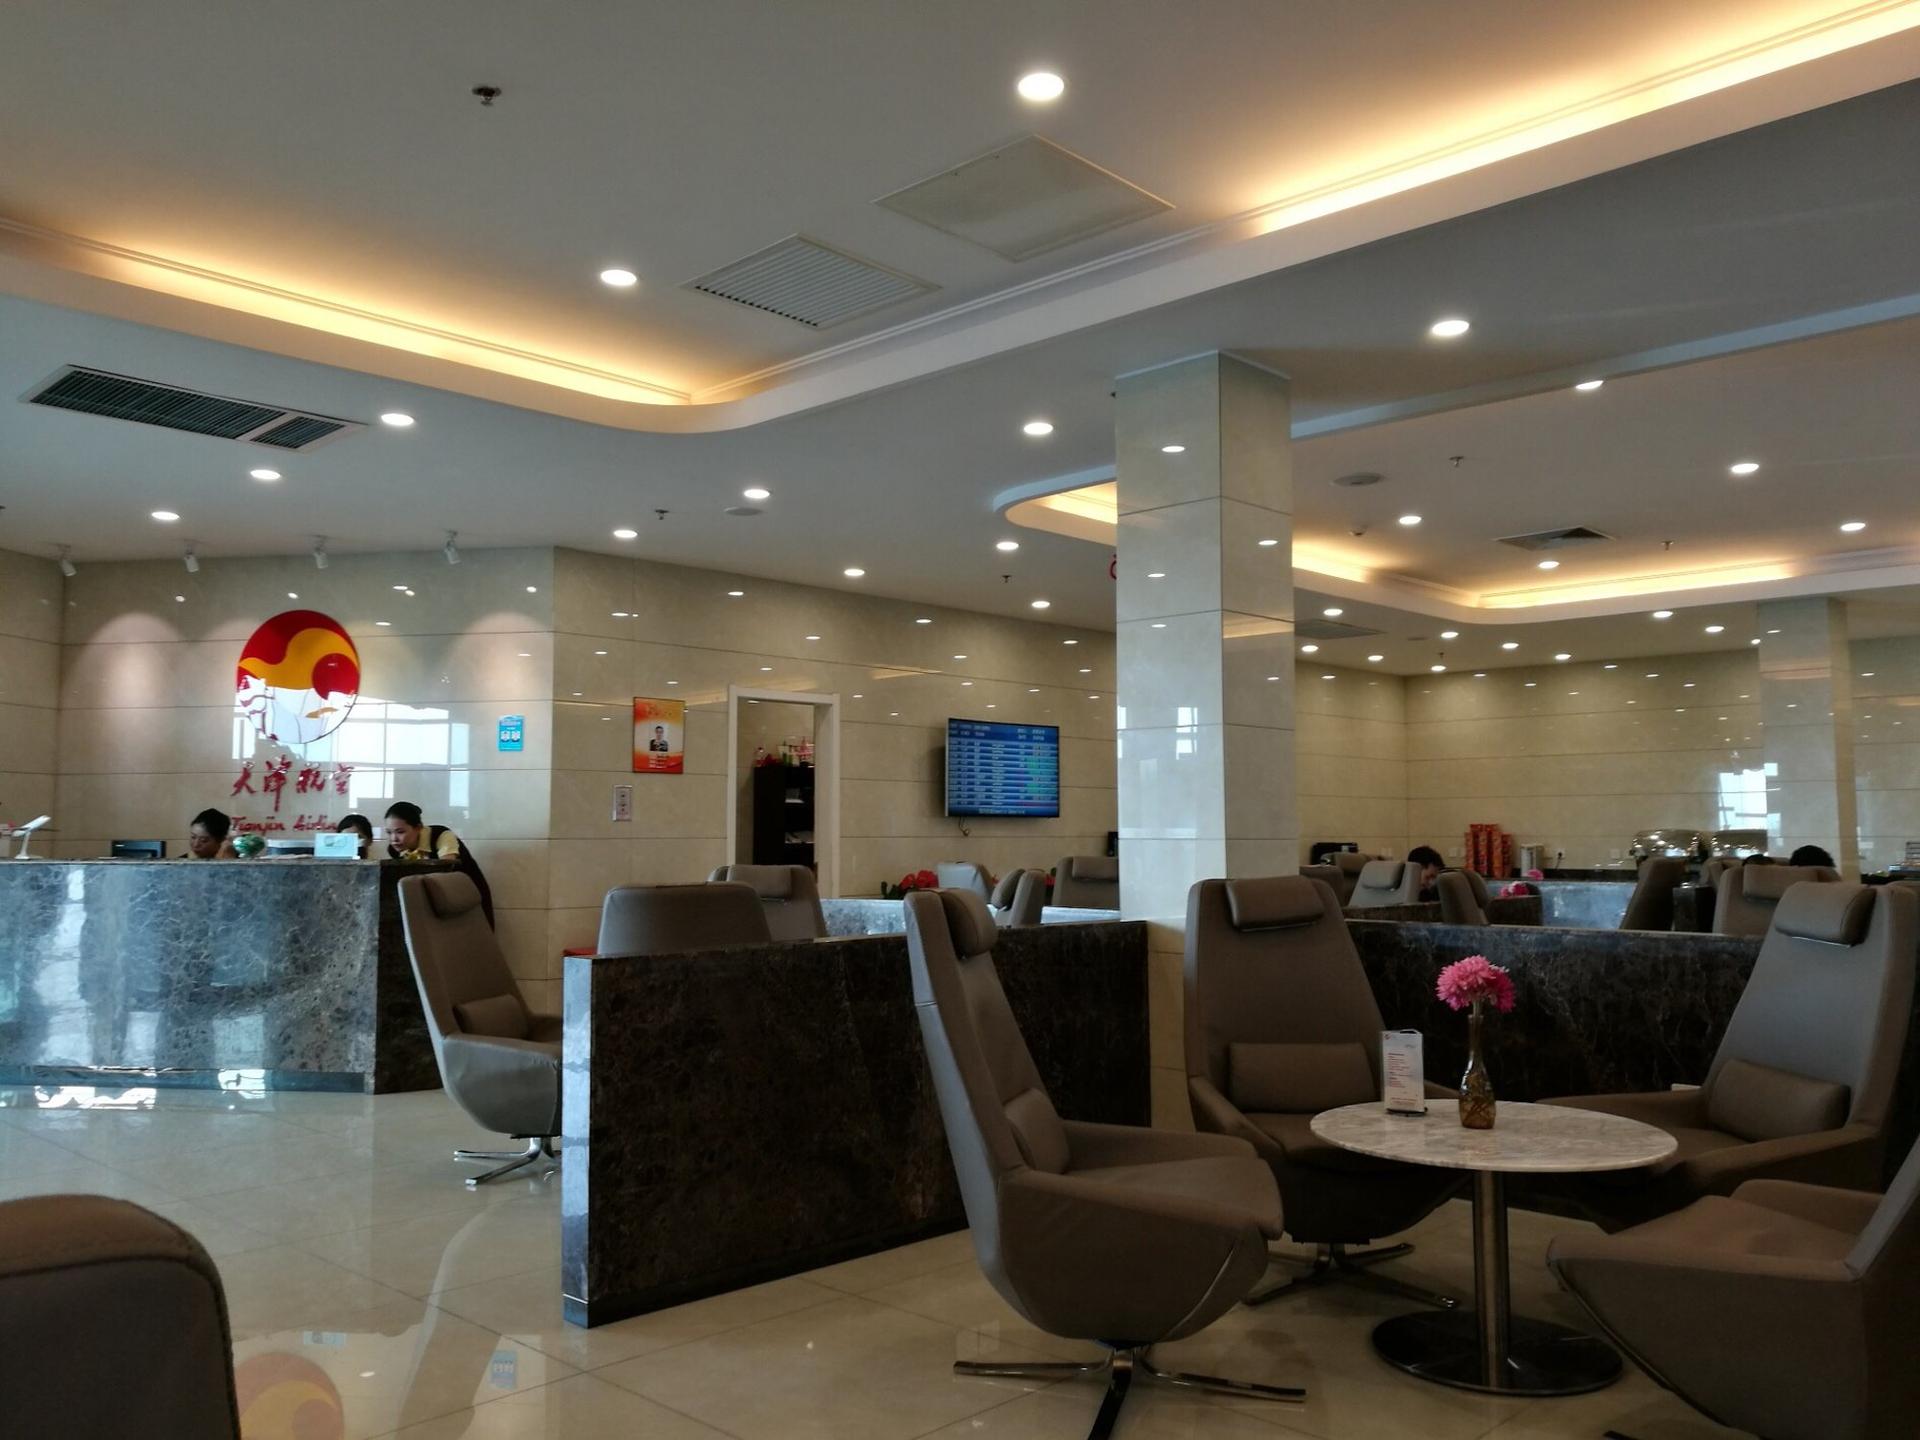 Tianjin Airlines Lounge image 6 of 13